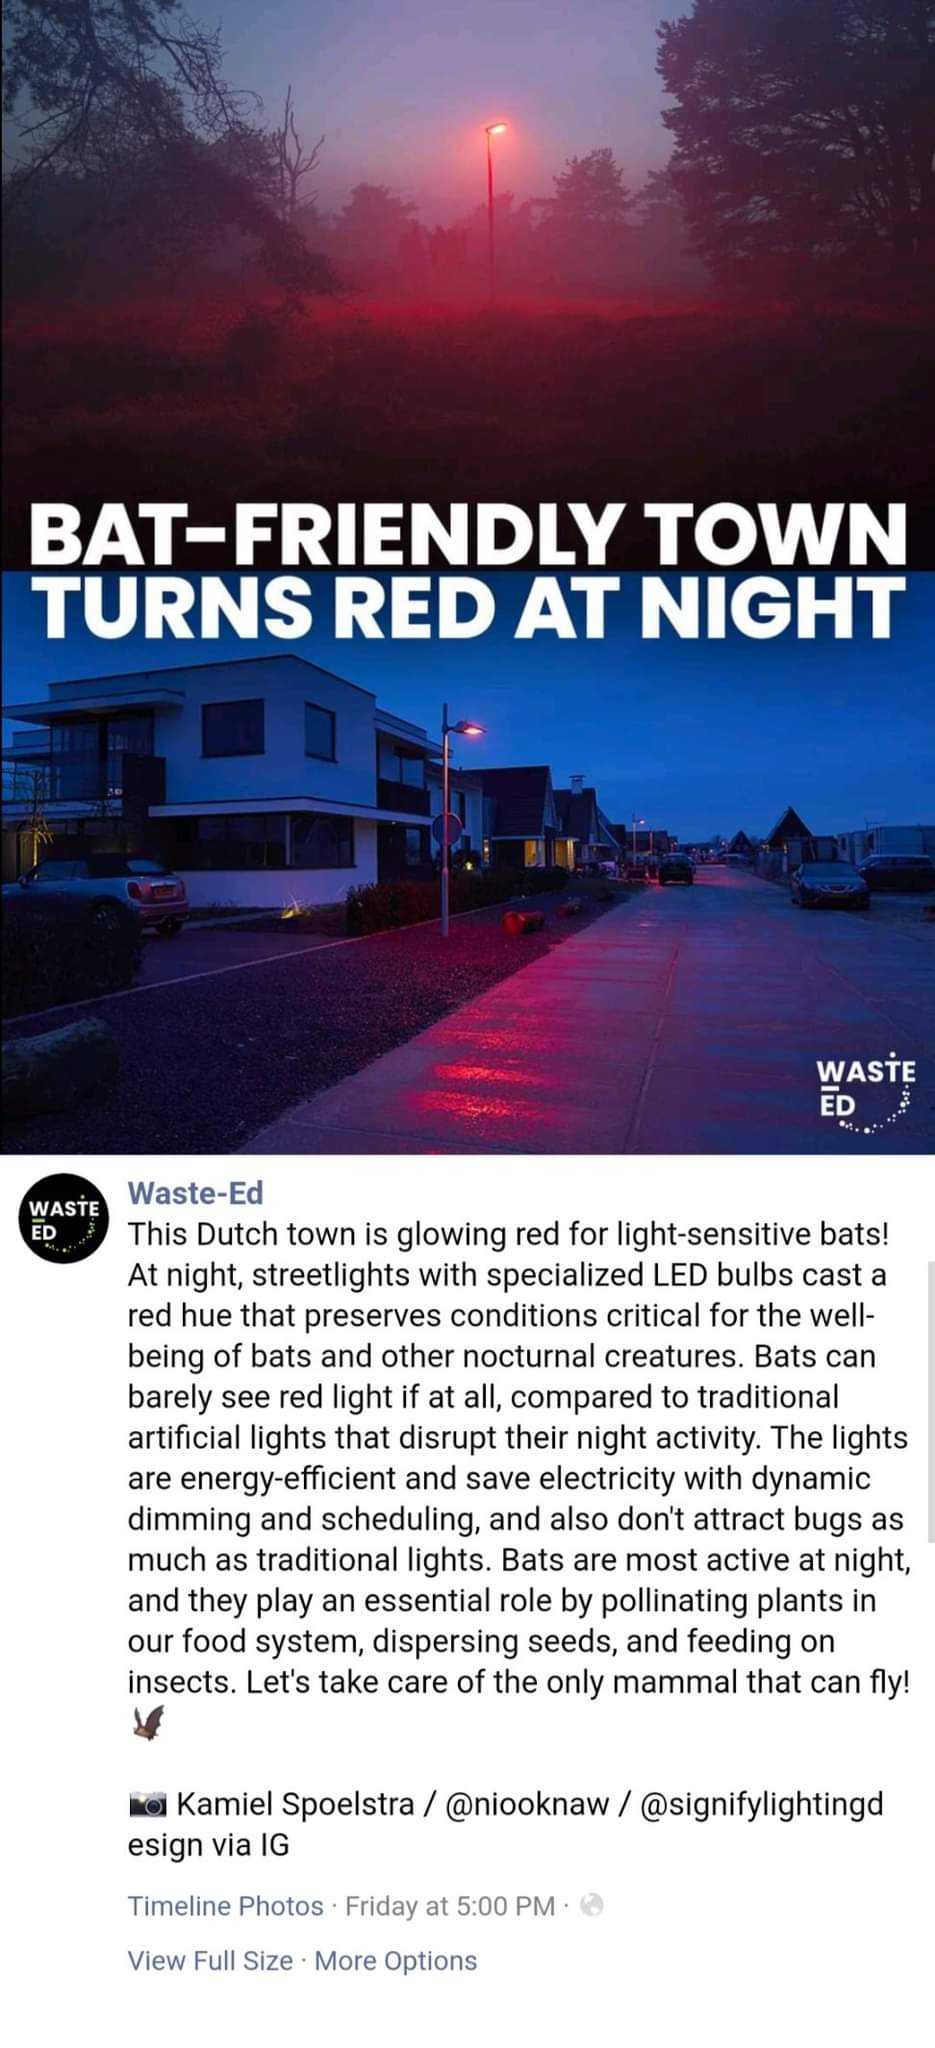 sky - BatFriendly Town Turns Red At Night Waste Ed 3185 Waste Ed WasteEd This Dutch town is glowing red for lightsensitive bats! At night, streetlights with specialized Led bulbs cast a red hue that preserves conditions critical for the well being of bats